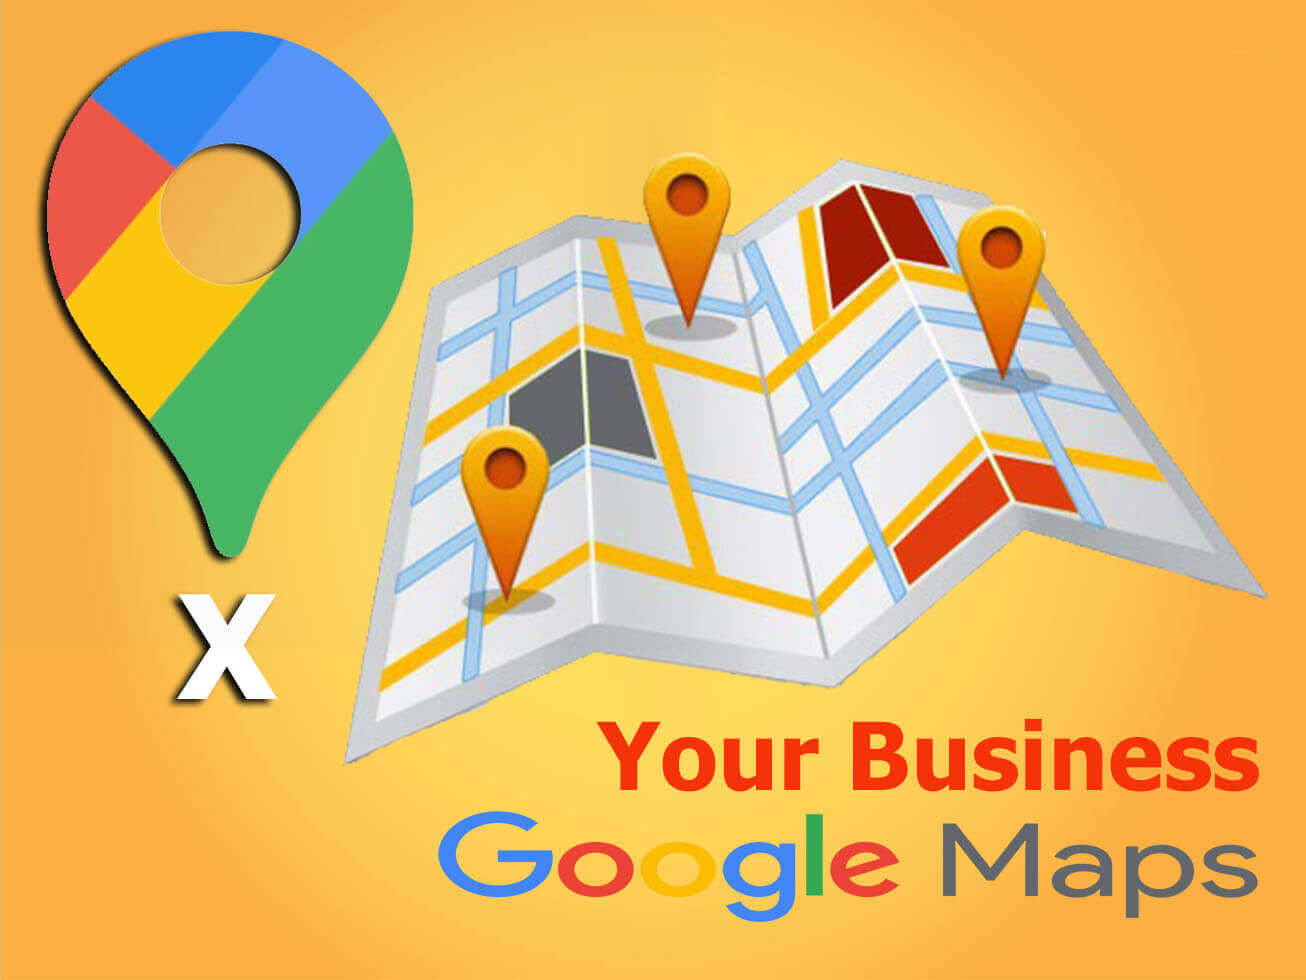 when someone uses Google Maps, they can have a consistent experience that fits their geo location